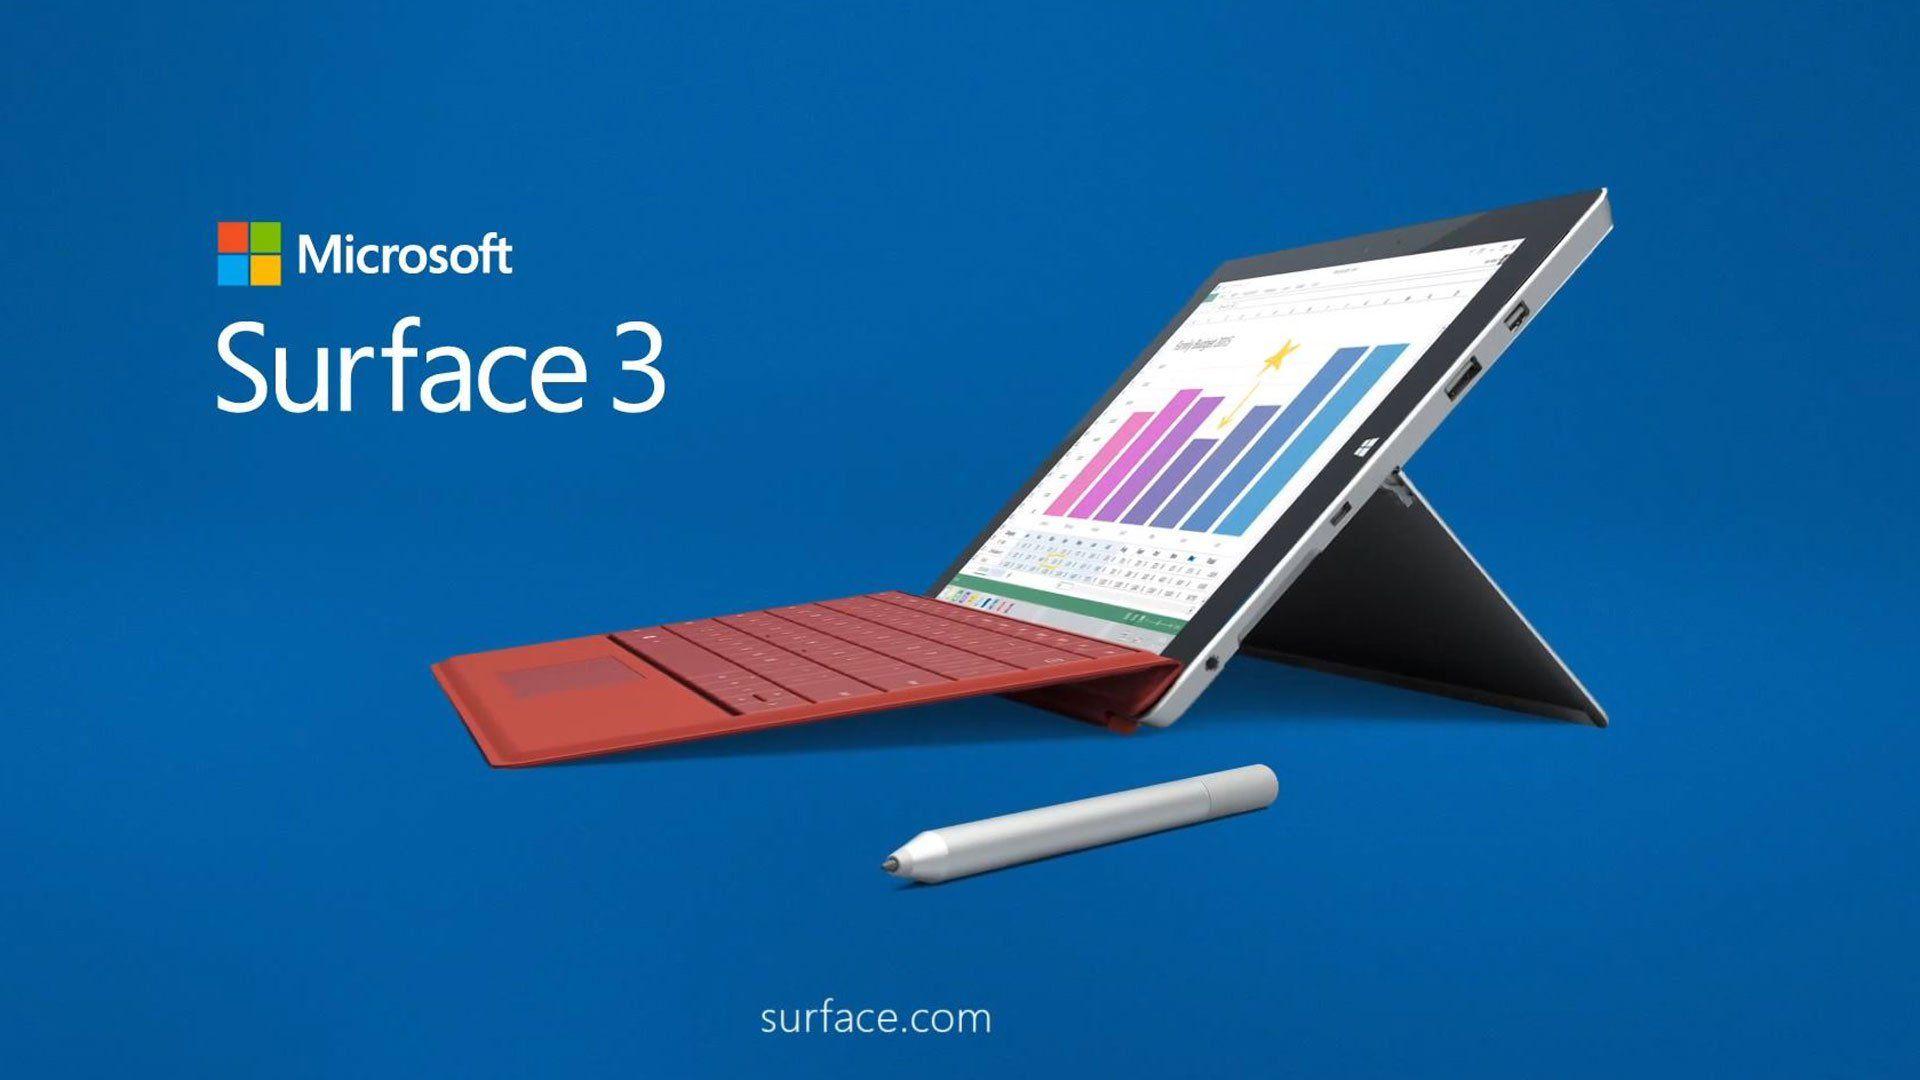 Surface Windows 8 Logo - AT&T Chooses Windows 8.1 over Windows 10 for Surface 3 Tablets